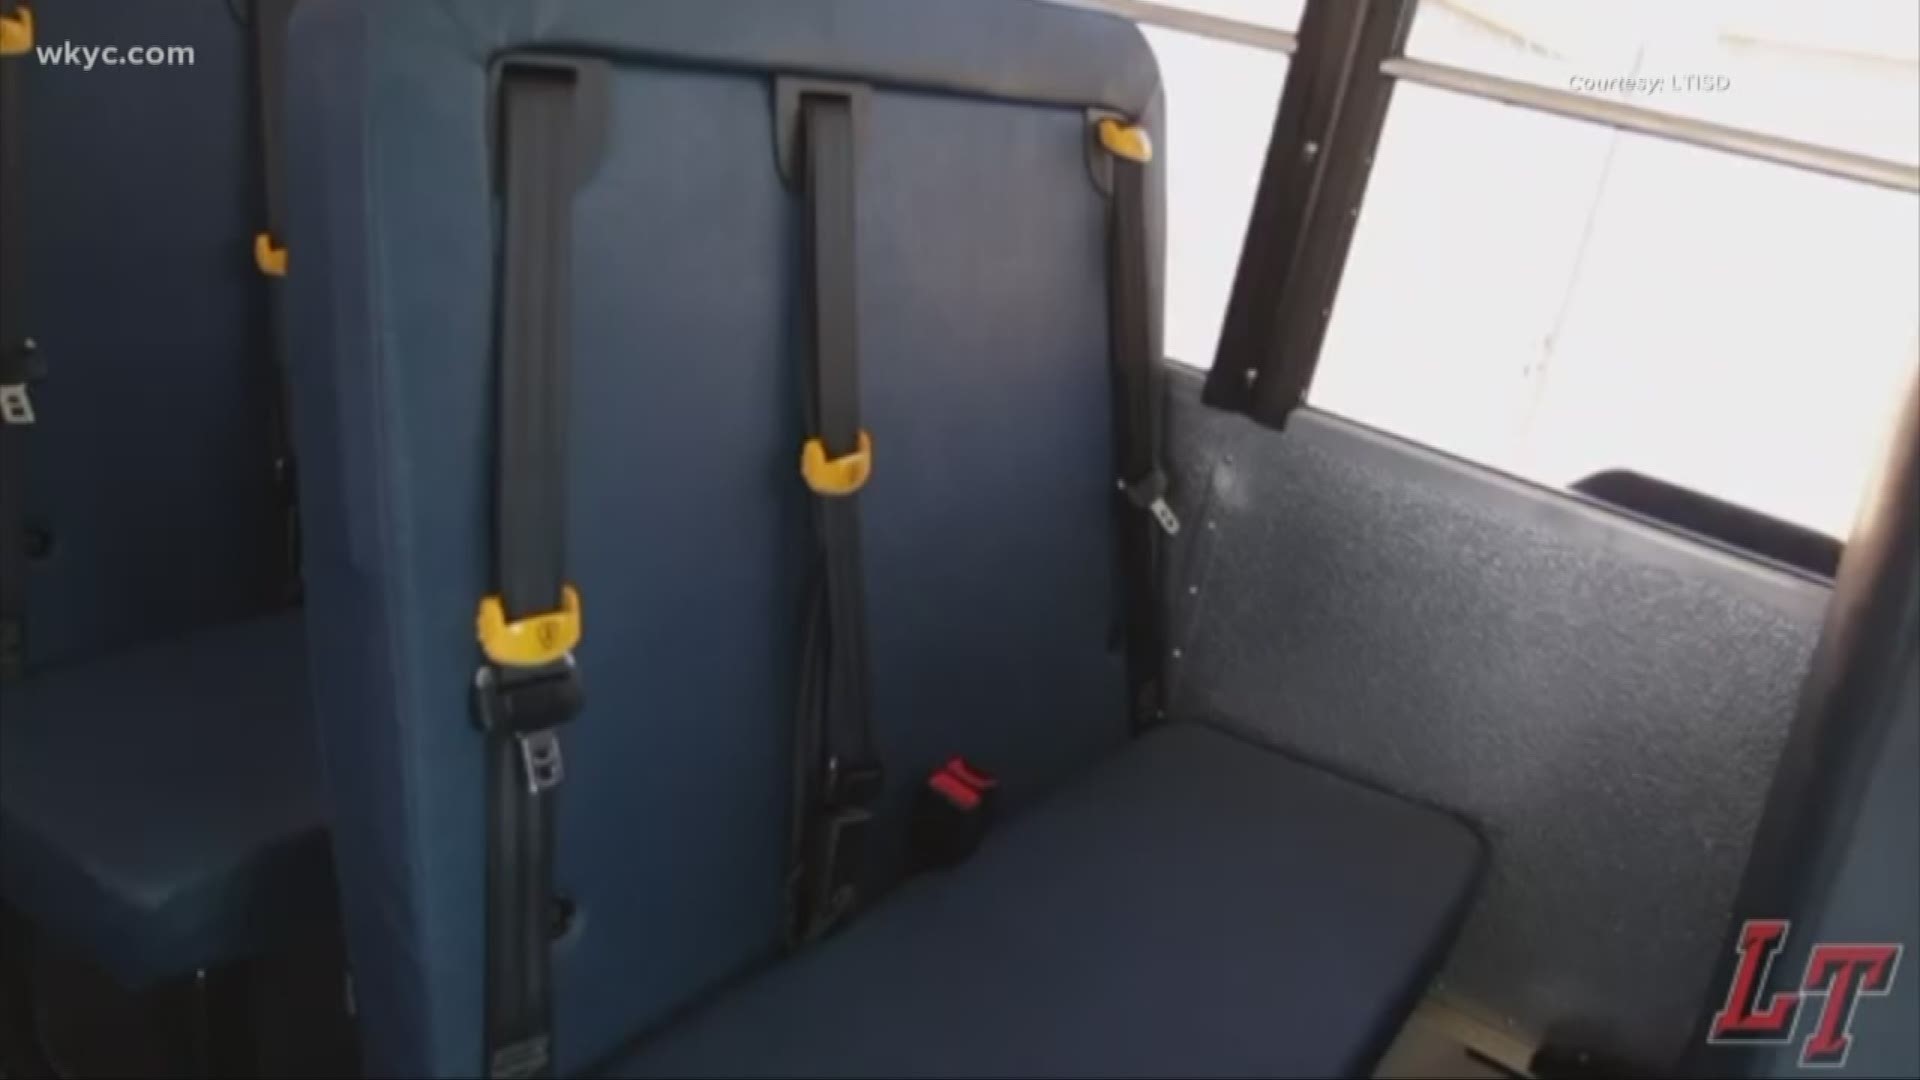 New program would bring seat belts to buses in Avon Lake